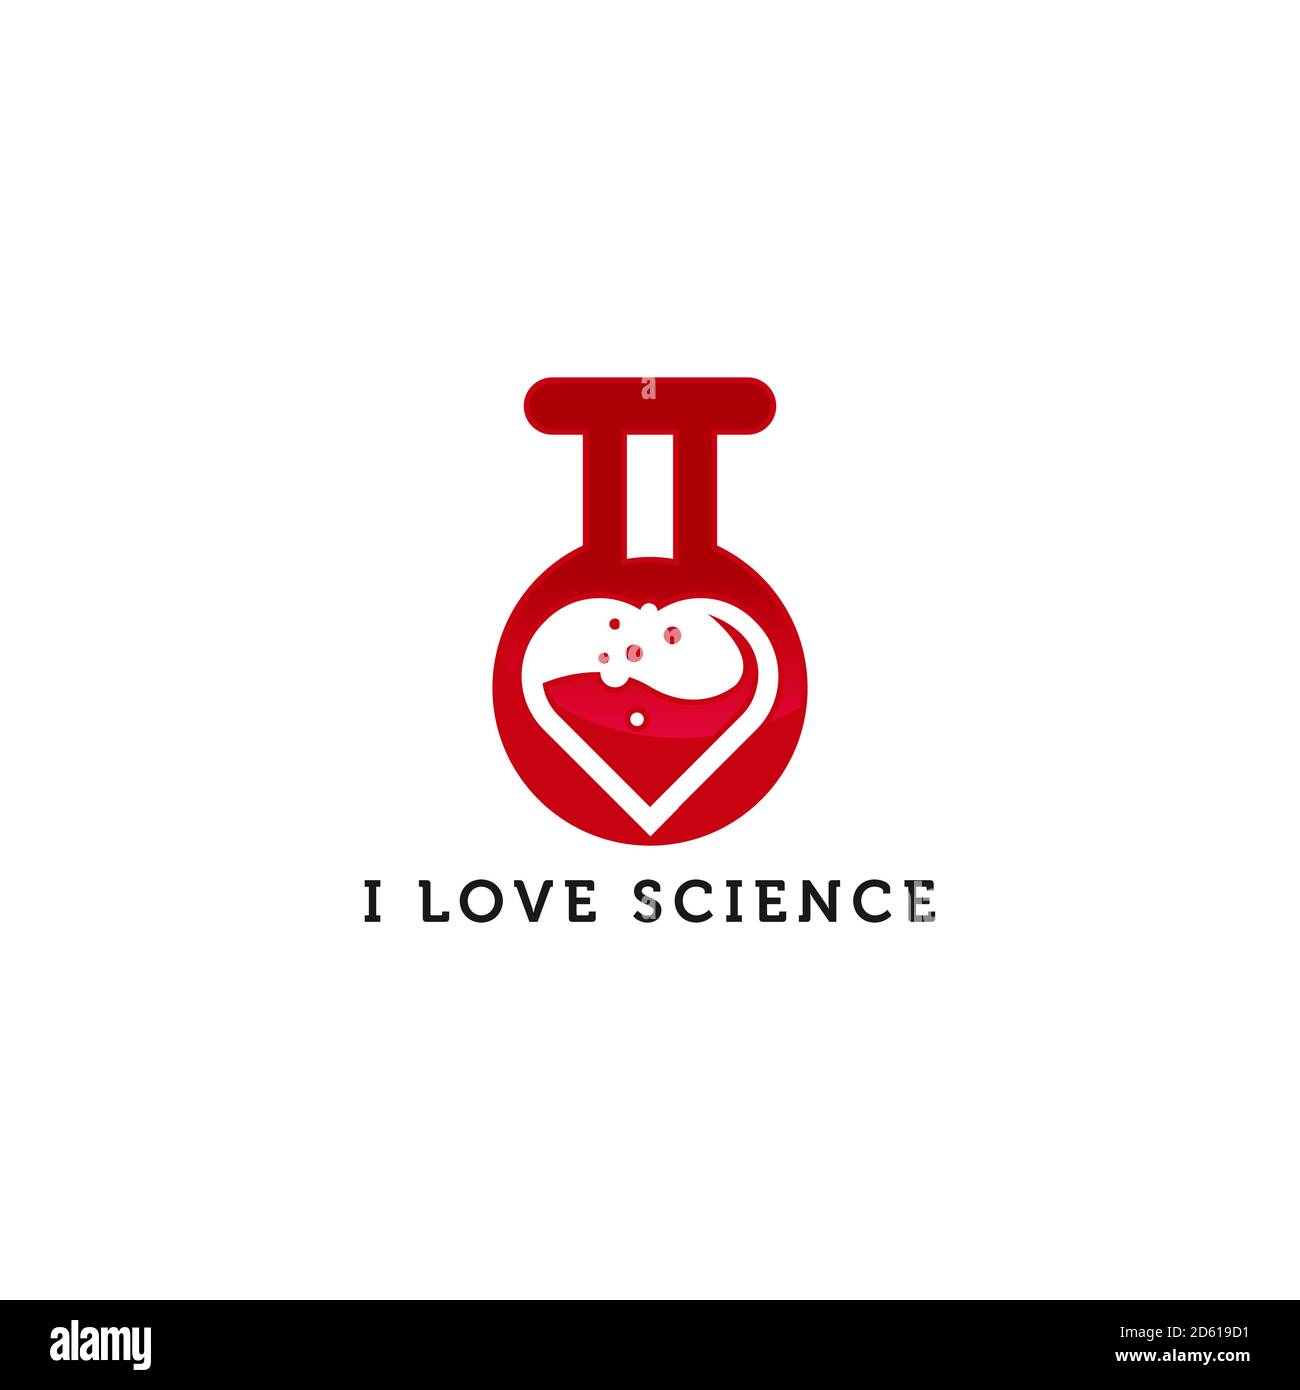 asbtract modern science logo with love heart symbol Stock Vector